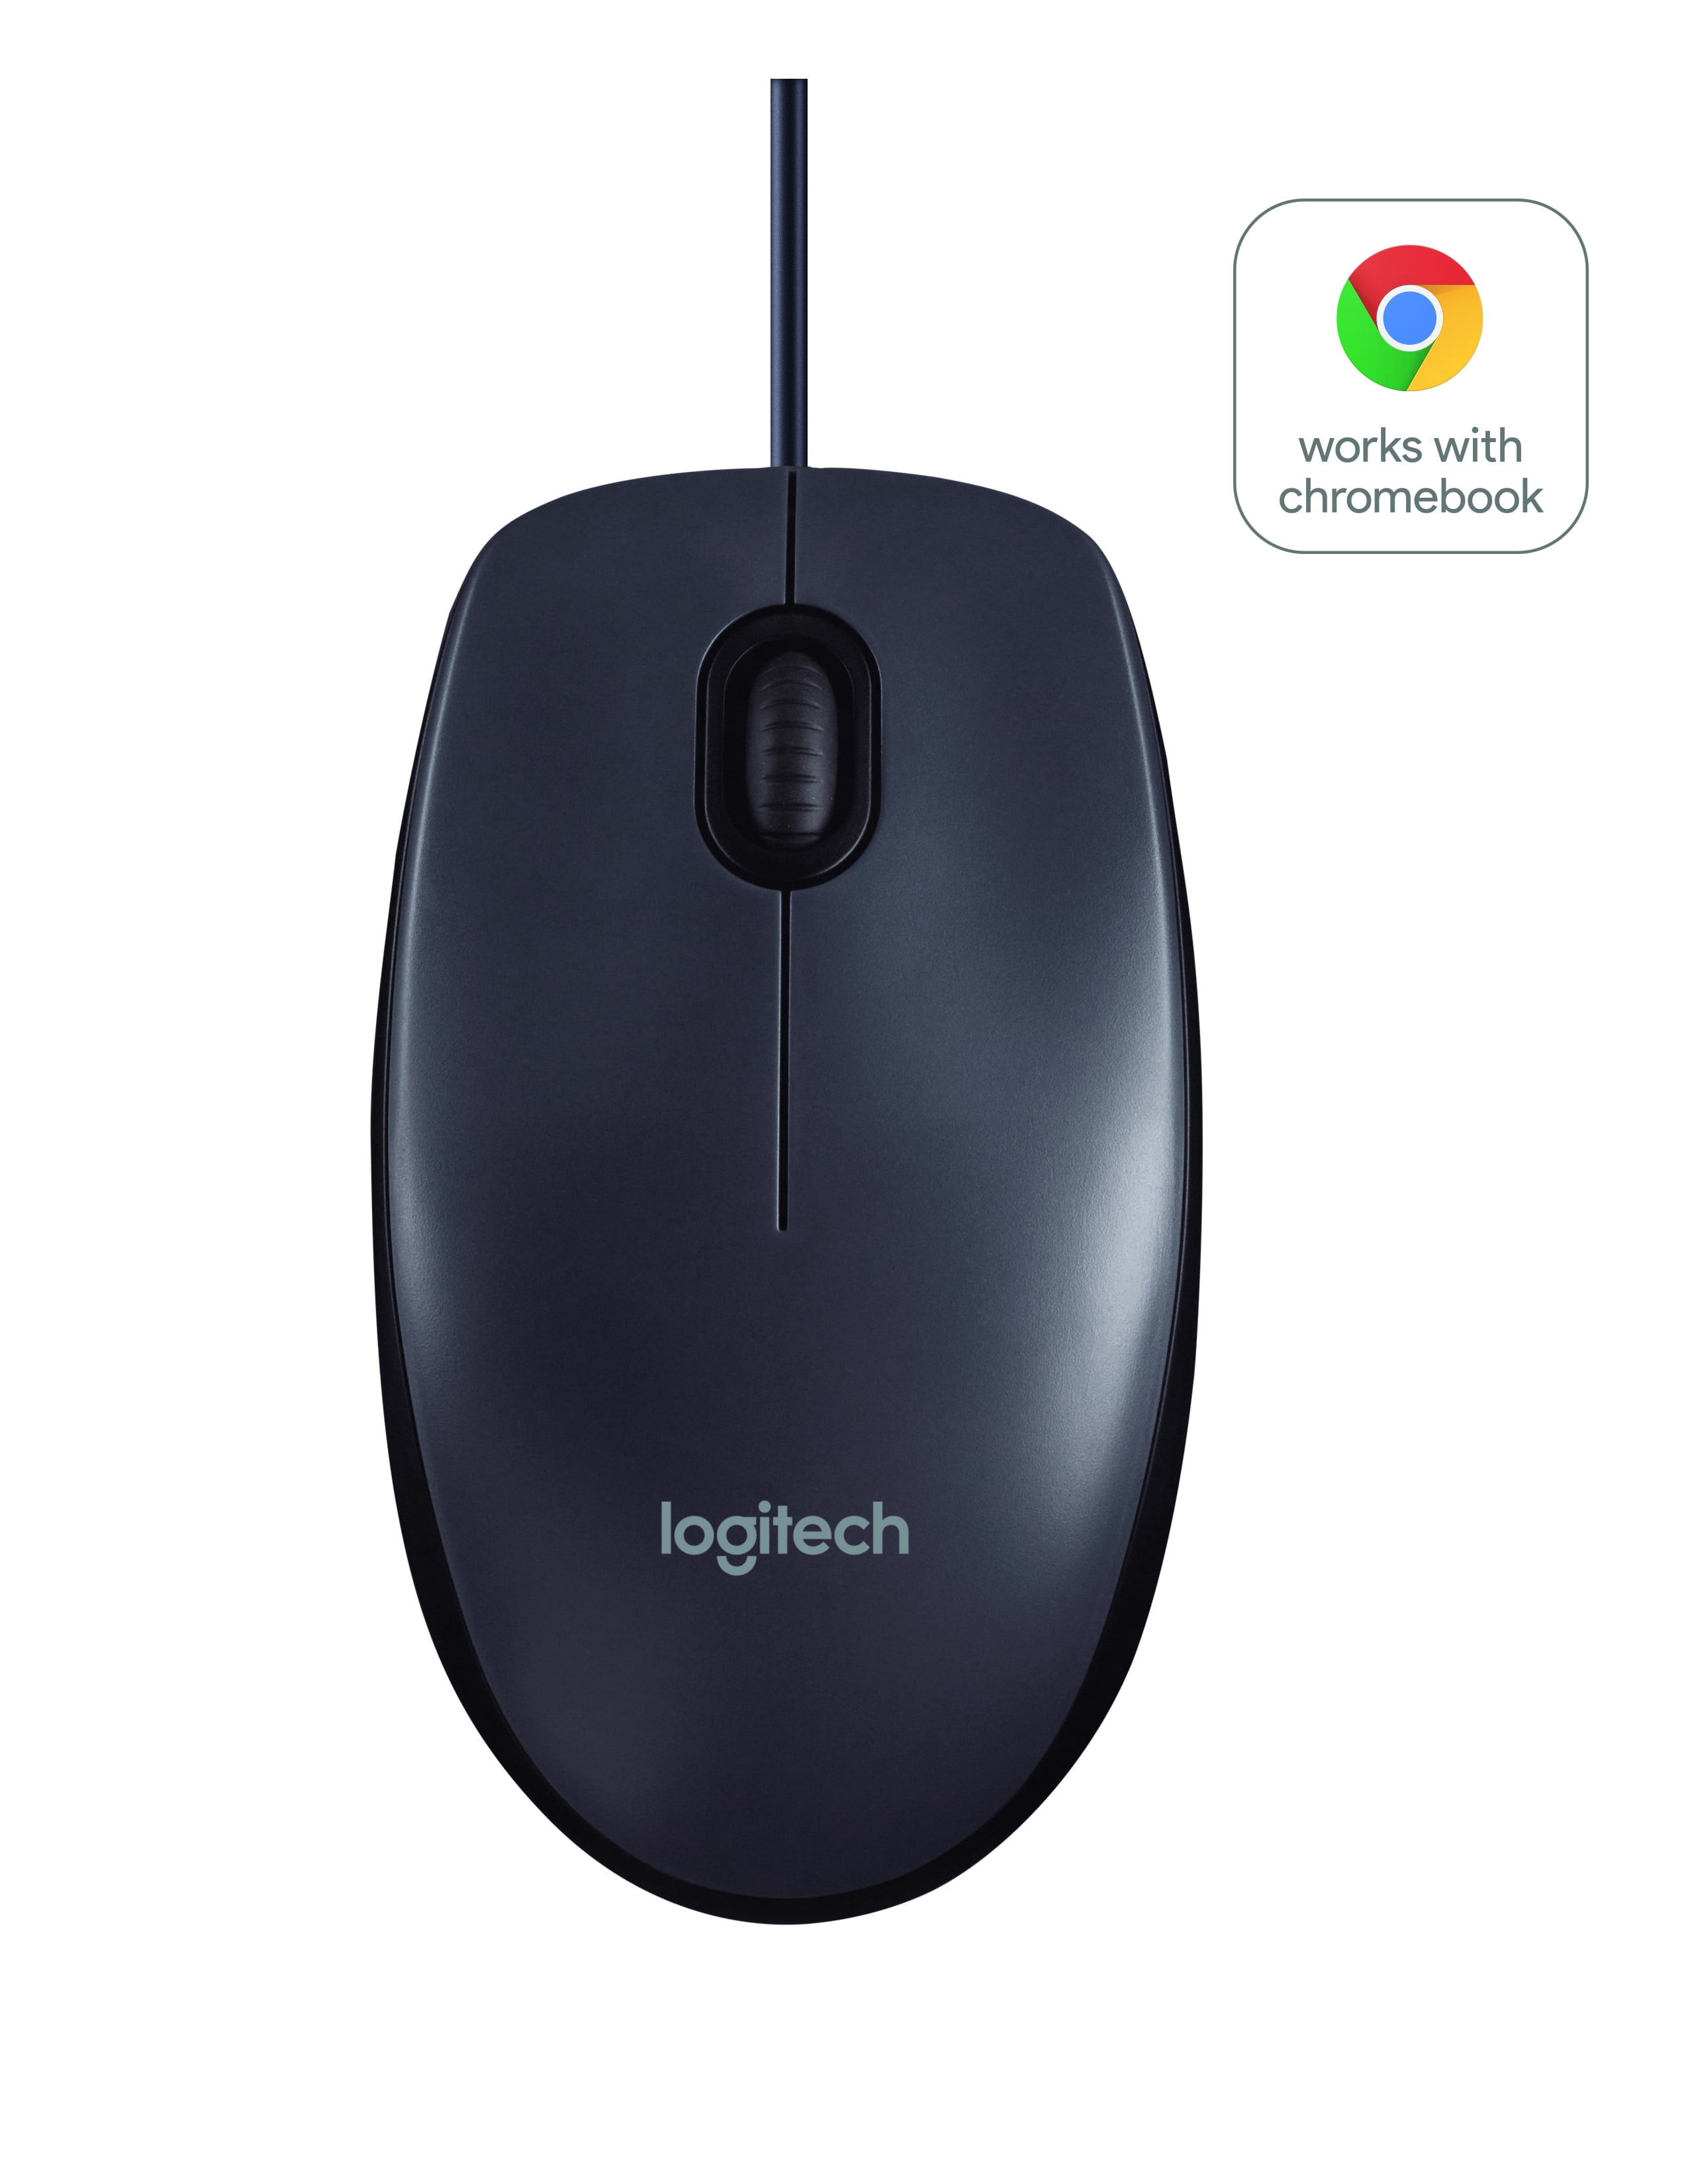 M100 USB Mouse, 3-Buttons,1000 DPI Optical Tracking, Ambidextrous, Compatible with PC, Mac, Laptop, Gray - Walmart.com